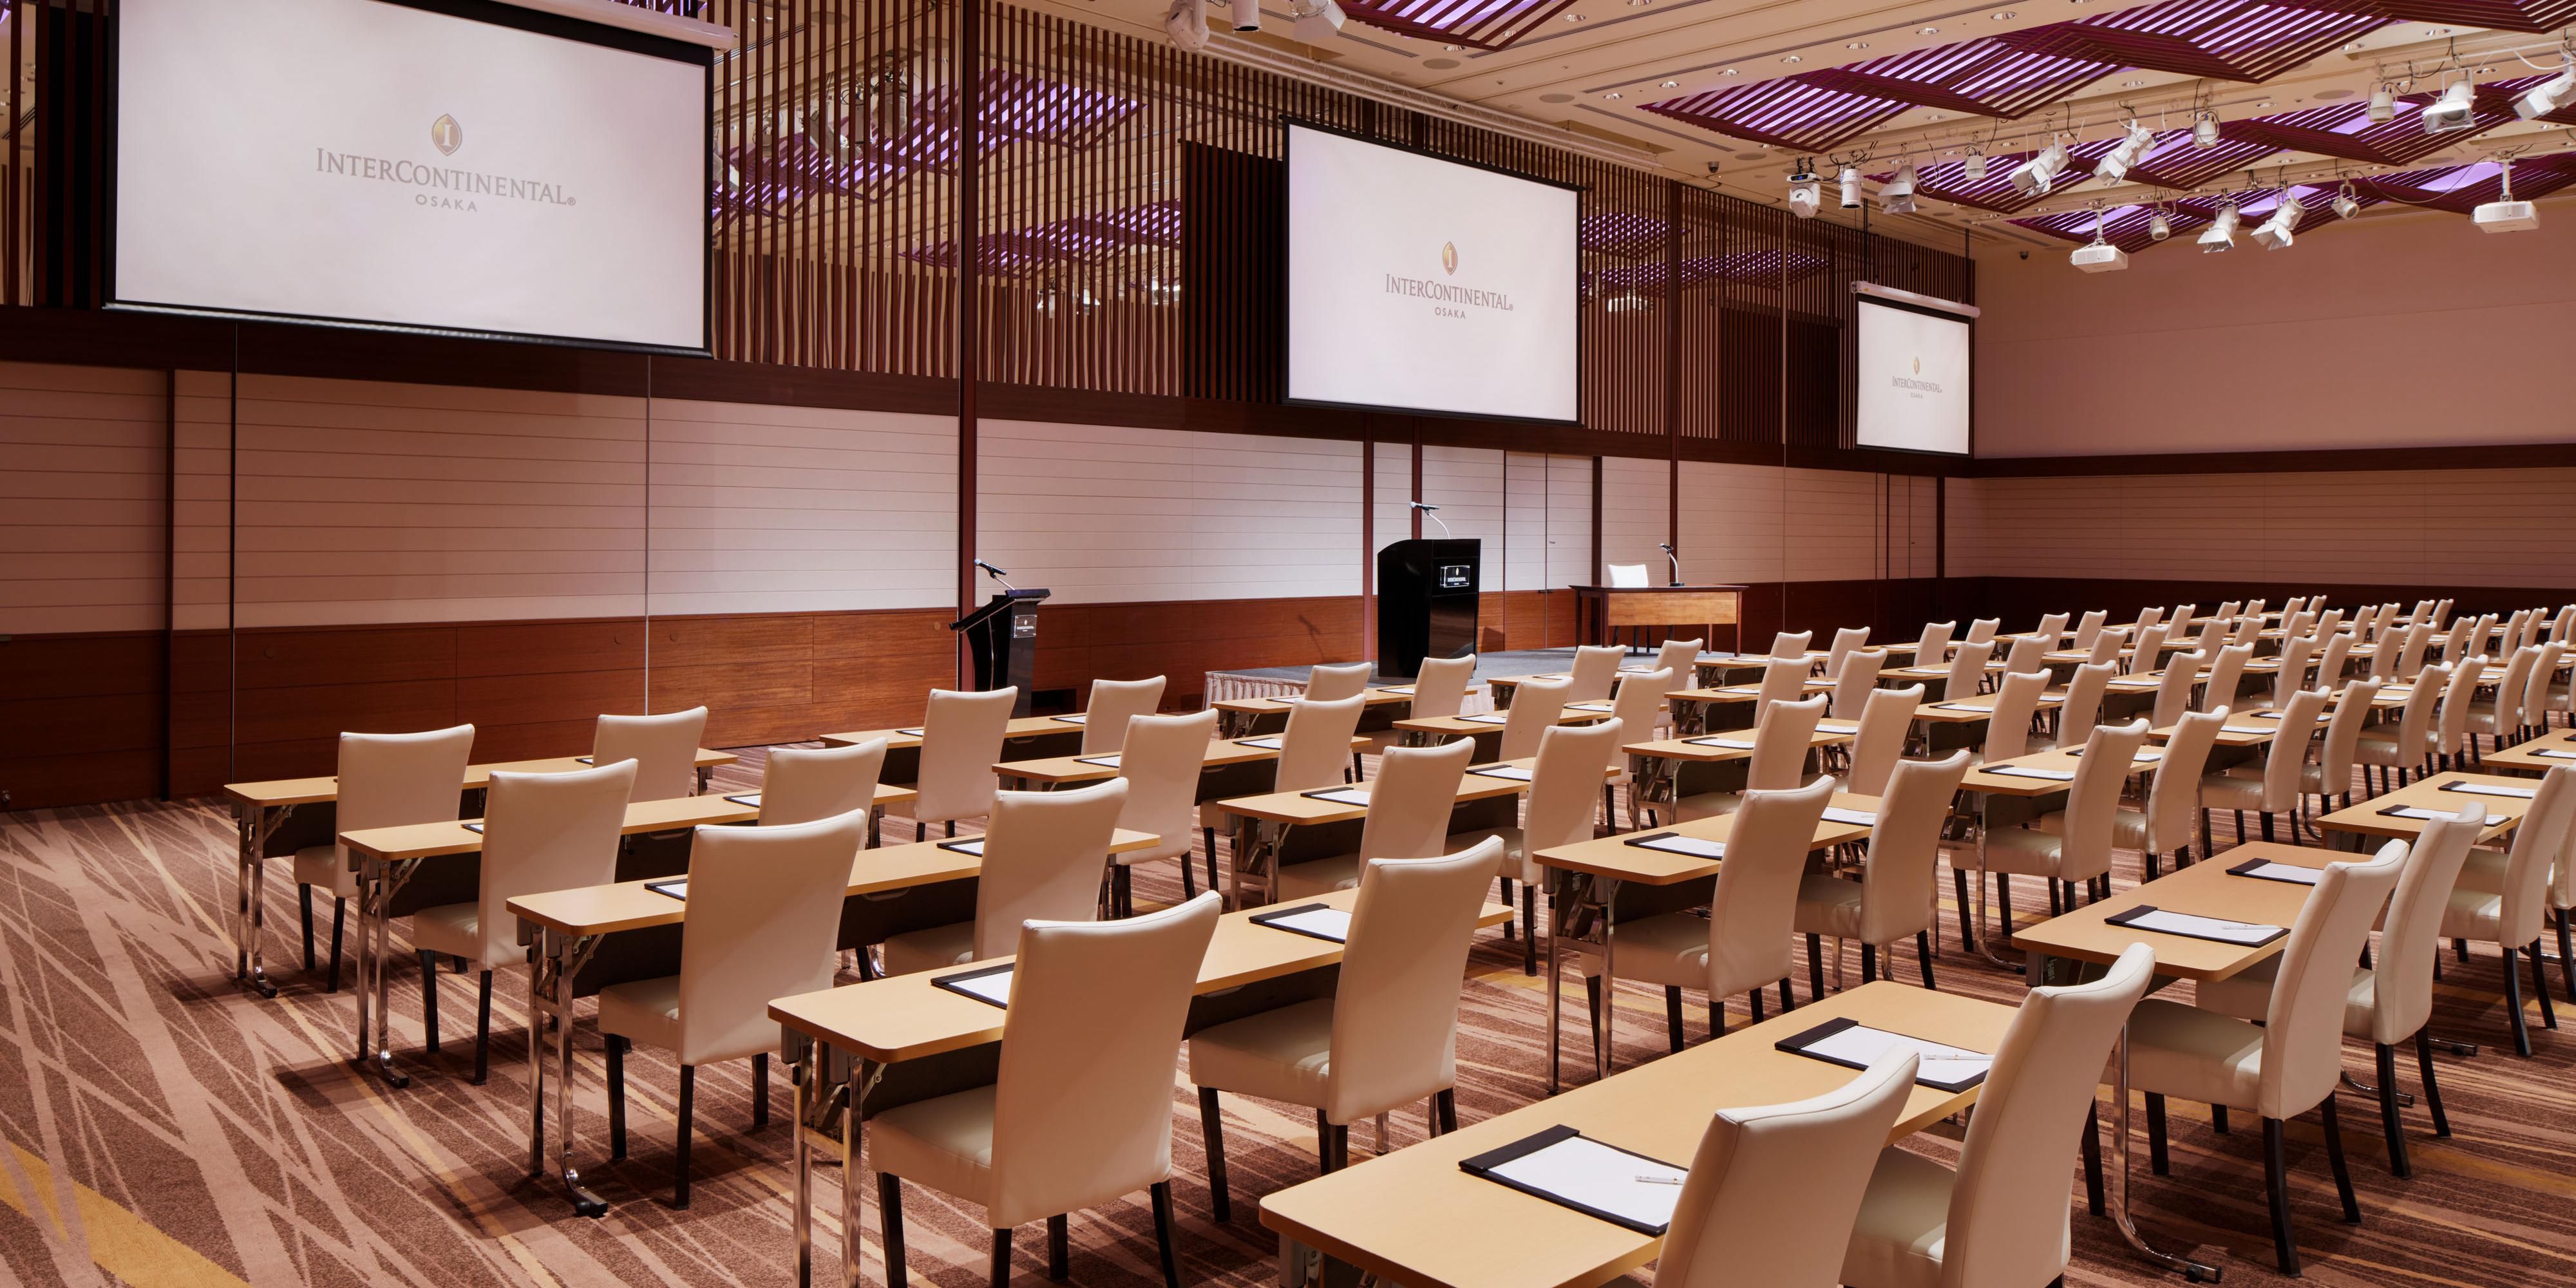 Through the global meeting program InterContinental Meetings, we create unique and effective corporate events designed to support the success of your business by featuring local Kansai food and cultural experiences.